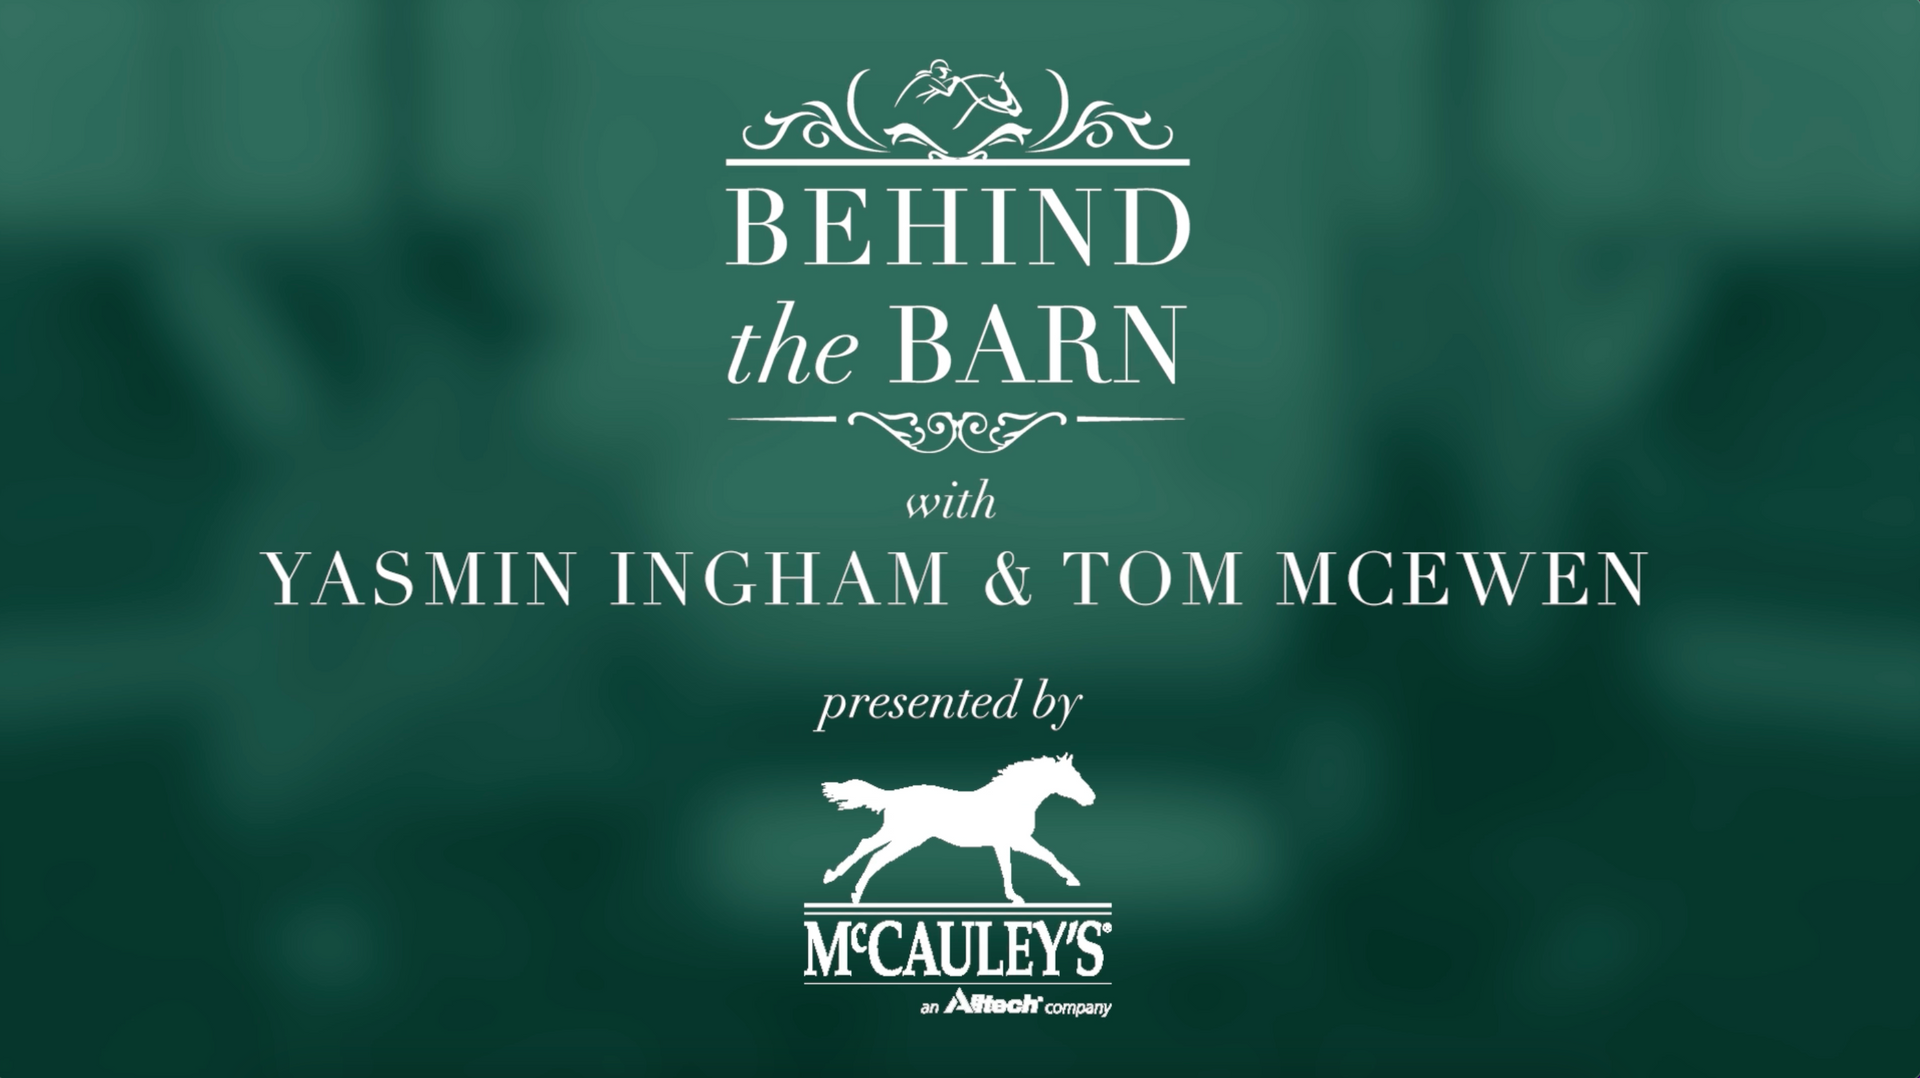 Behind the barn with yasmin ingham and tom mcewen